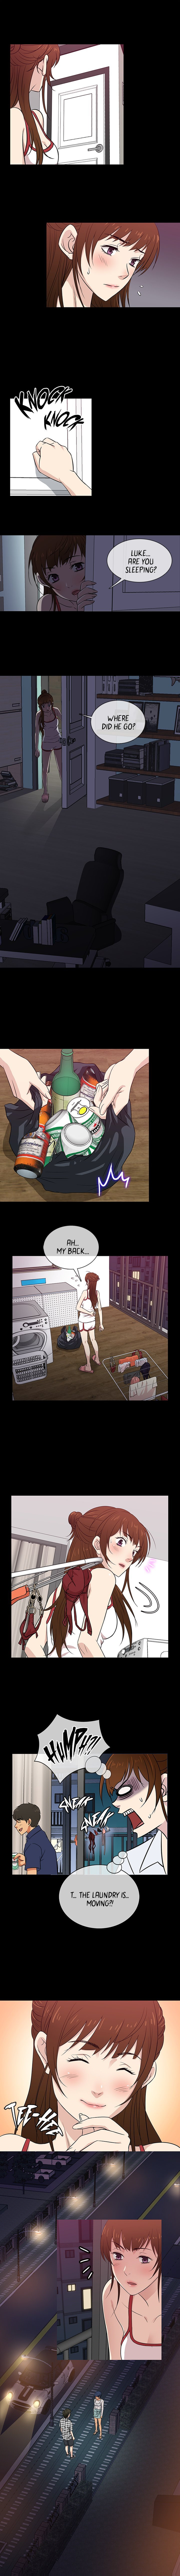 shes-back-chap-25-5